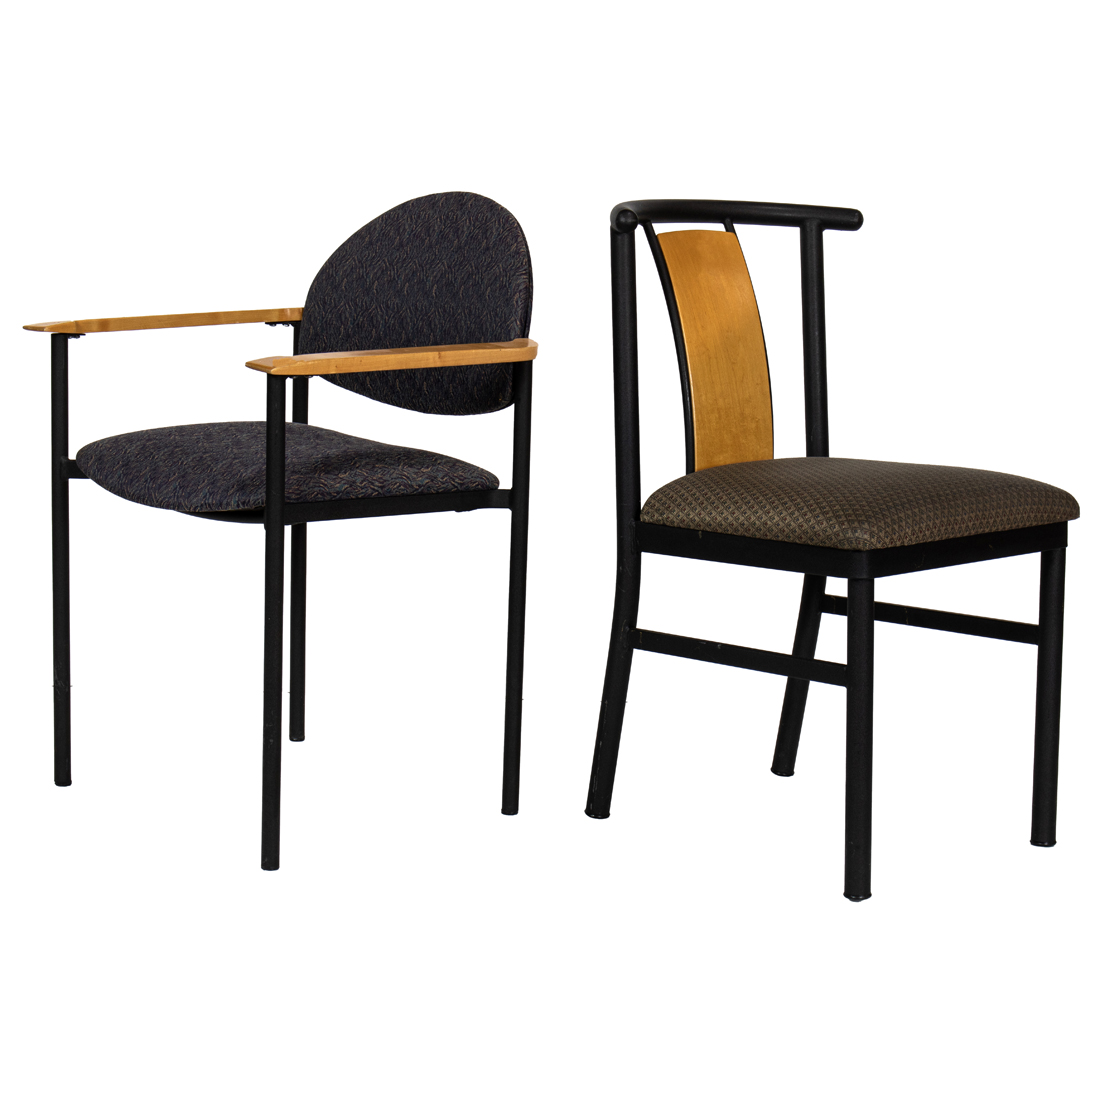 TWO MODERN METAL AND WOOD CHAIRS,